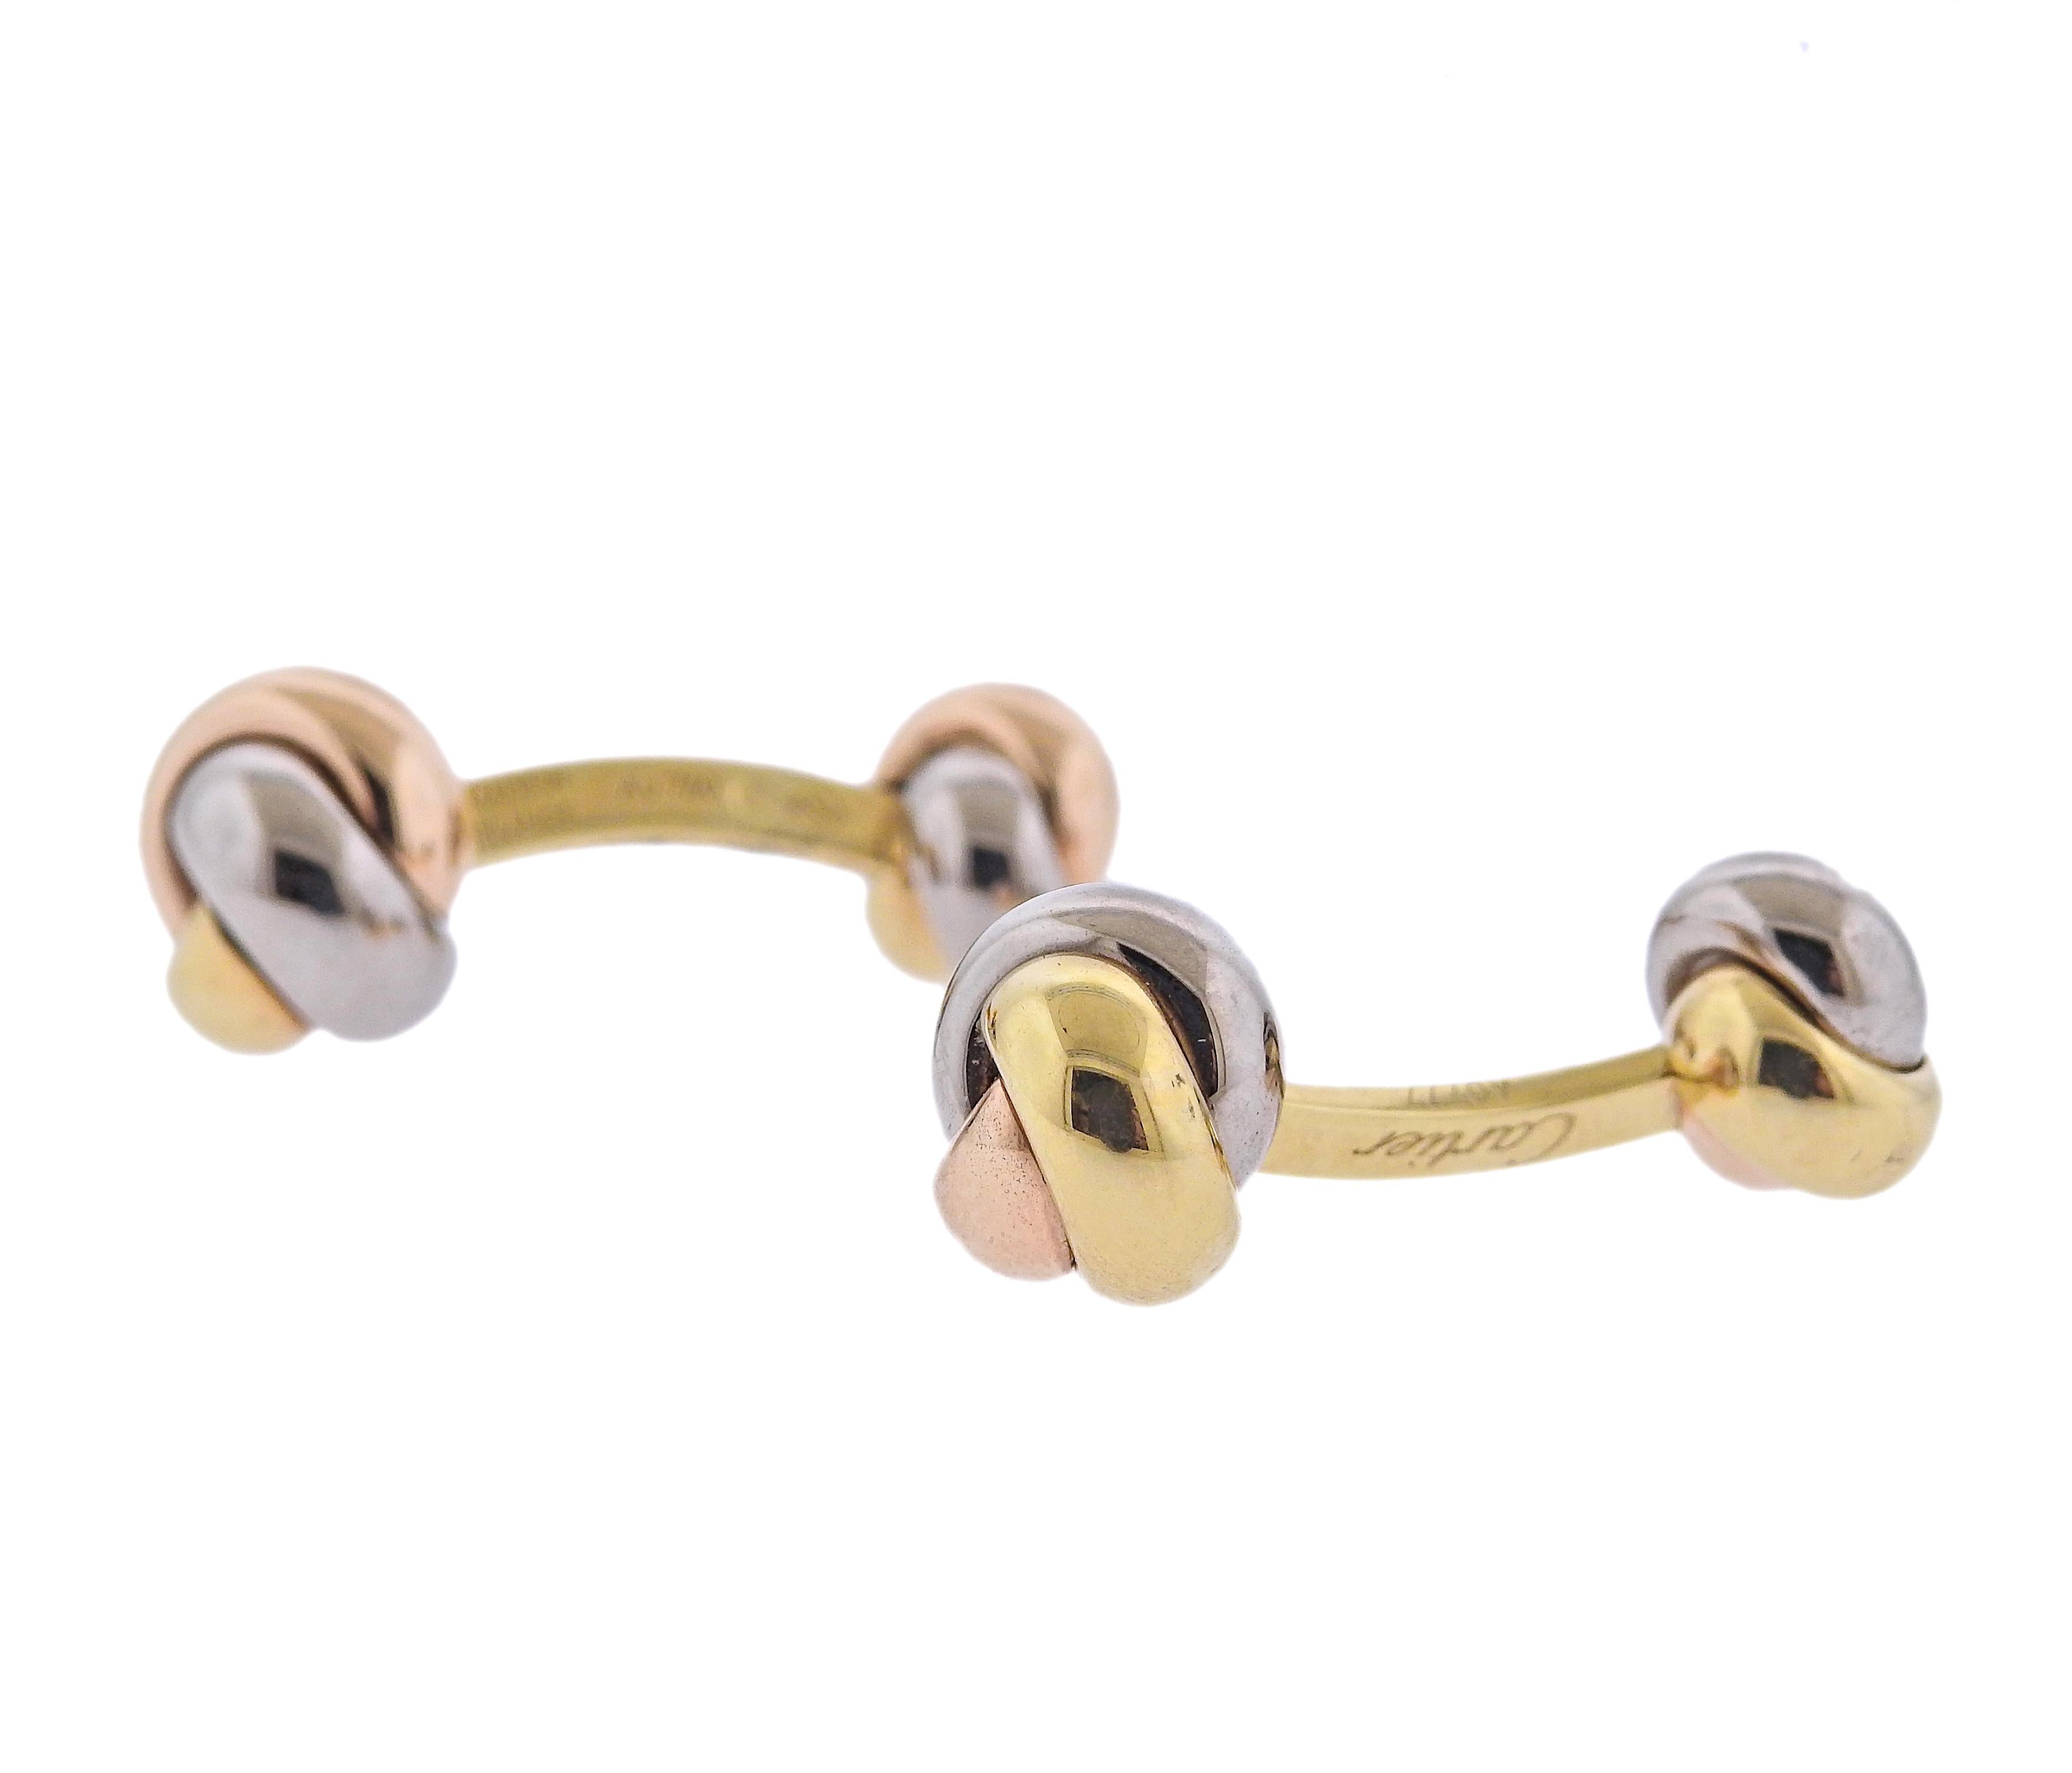 Pair of classic 18k white, yellow and rose gold Trinity cufflinks by Cartier. Each top is 13mm x 13mm, back - 10 x 9mm. Marked: Cartier, 750, A0777, made in France. Weight - 11.7 grams.